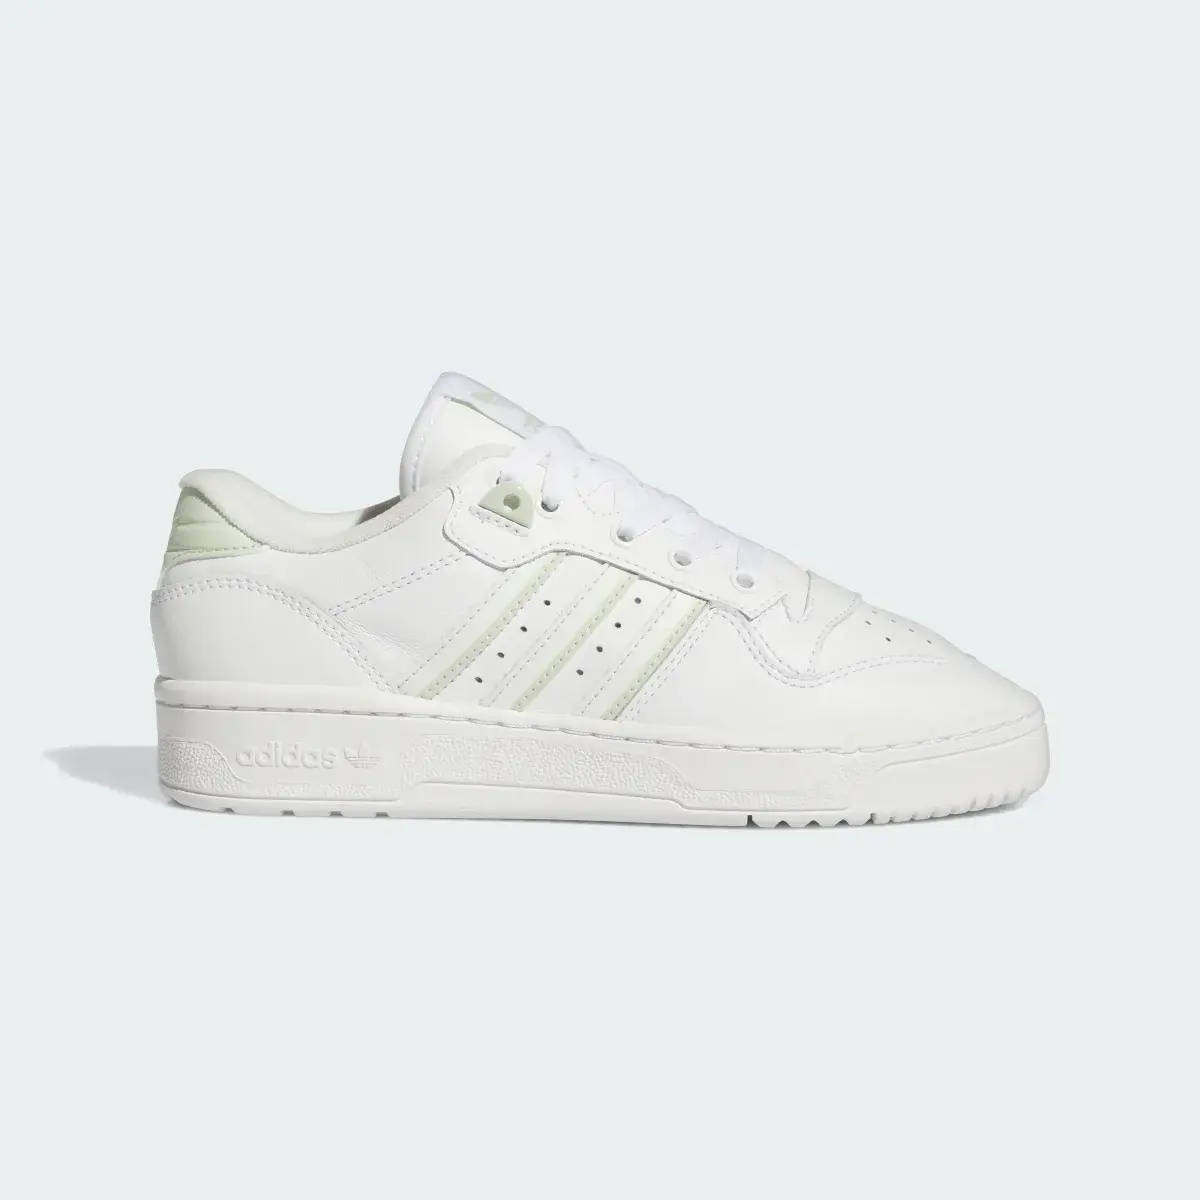 Adidas Rivalry Low Schuh. 2